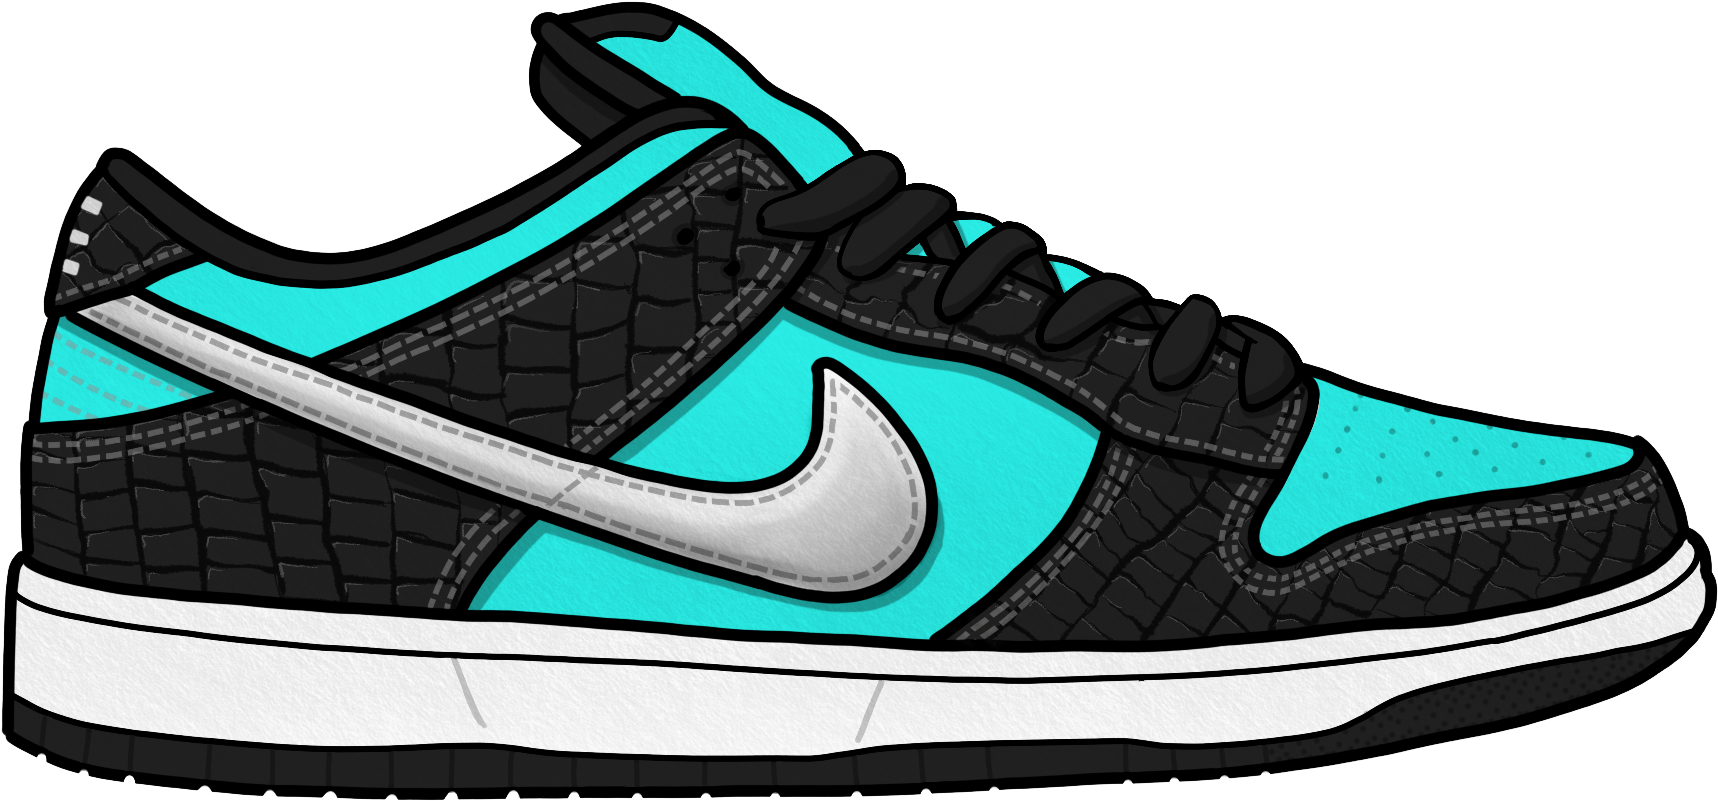 Free Nike Shoes PNG Images with Transparent Backgrounds - FastPNG.com